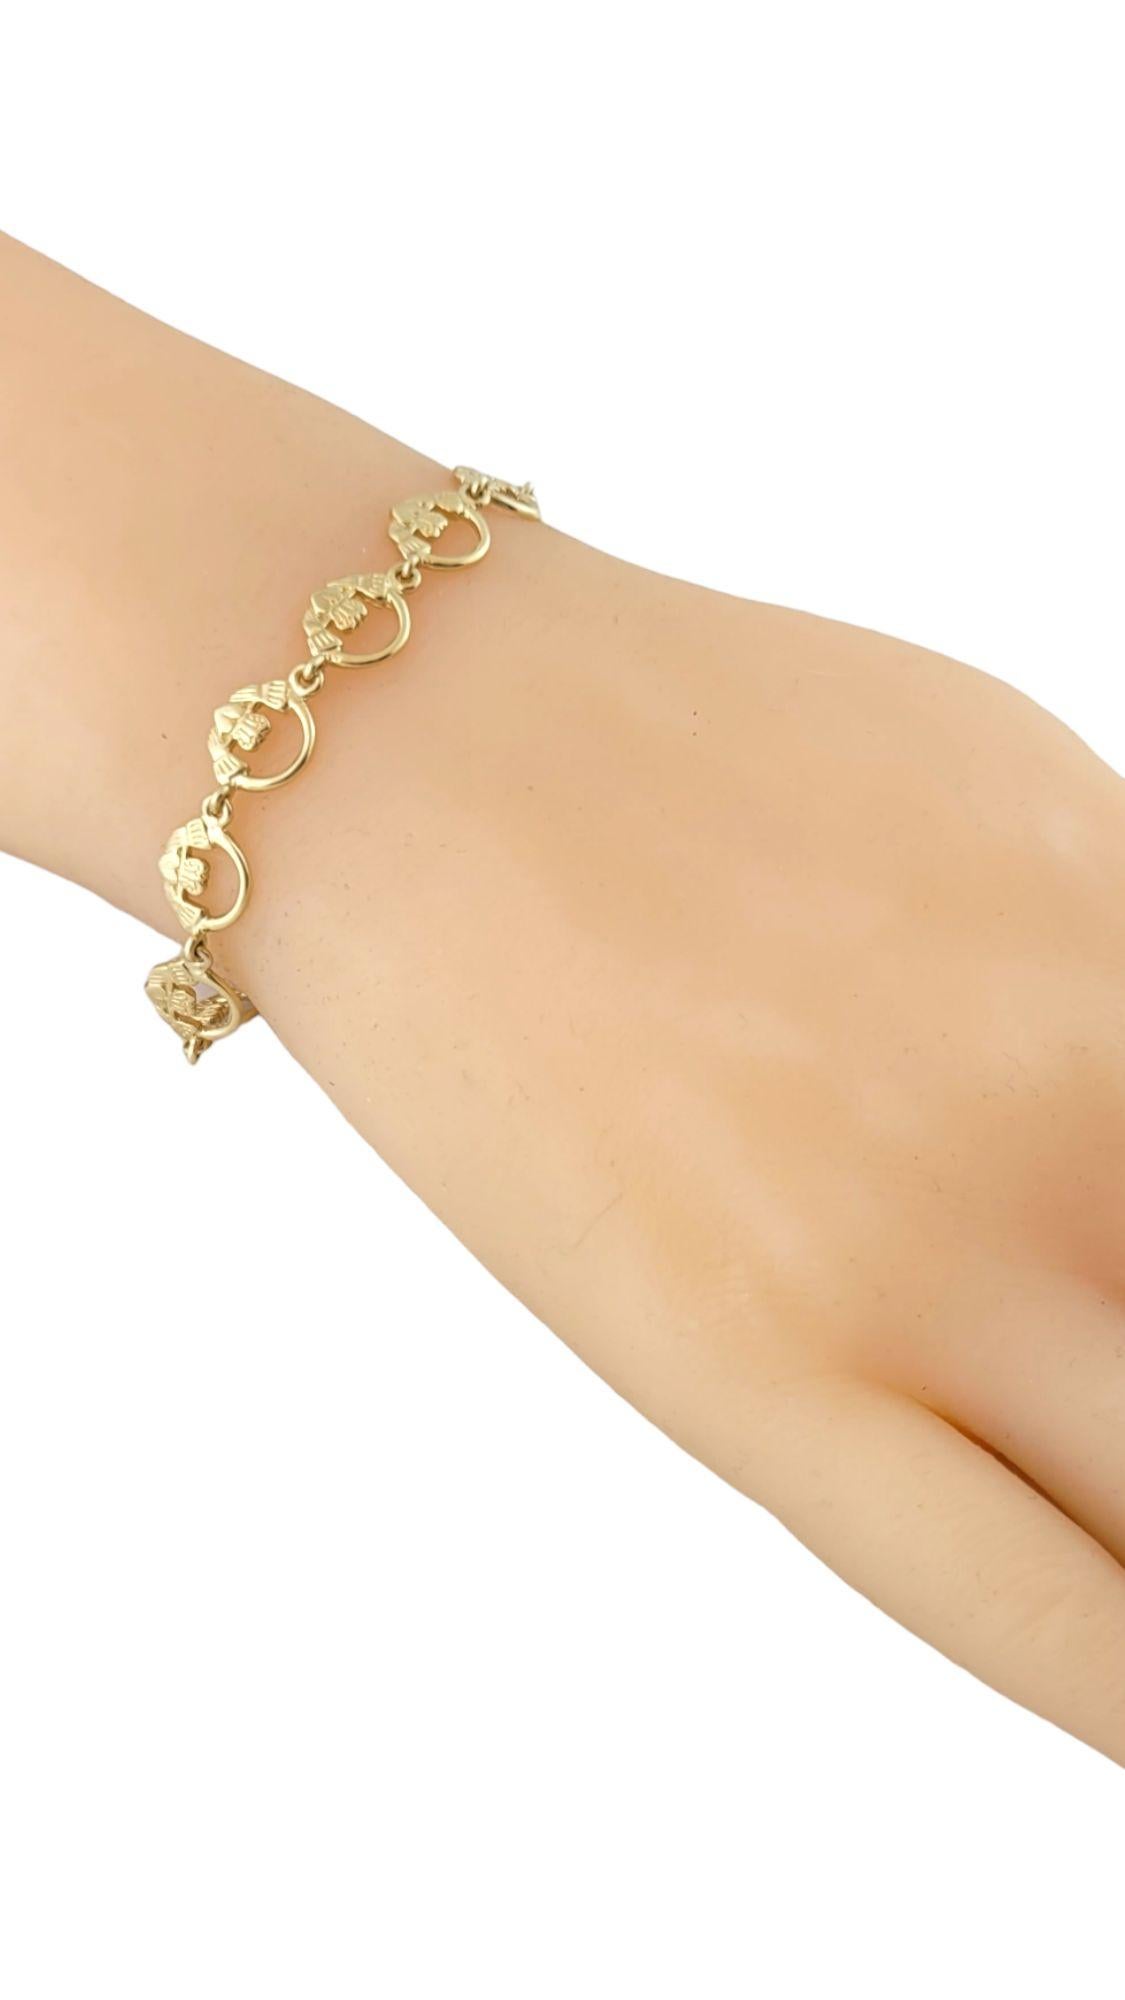  14K Yellow Gold Claddagh Bracelet #14512 For Sale 2